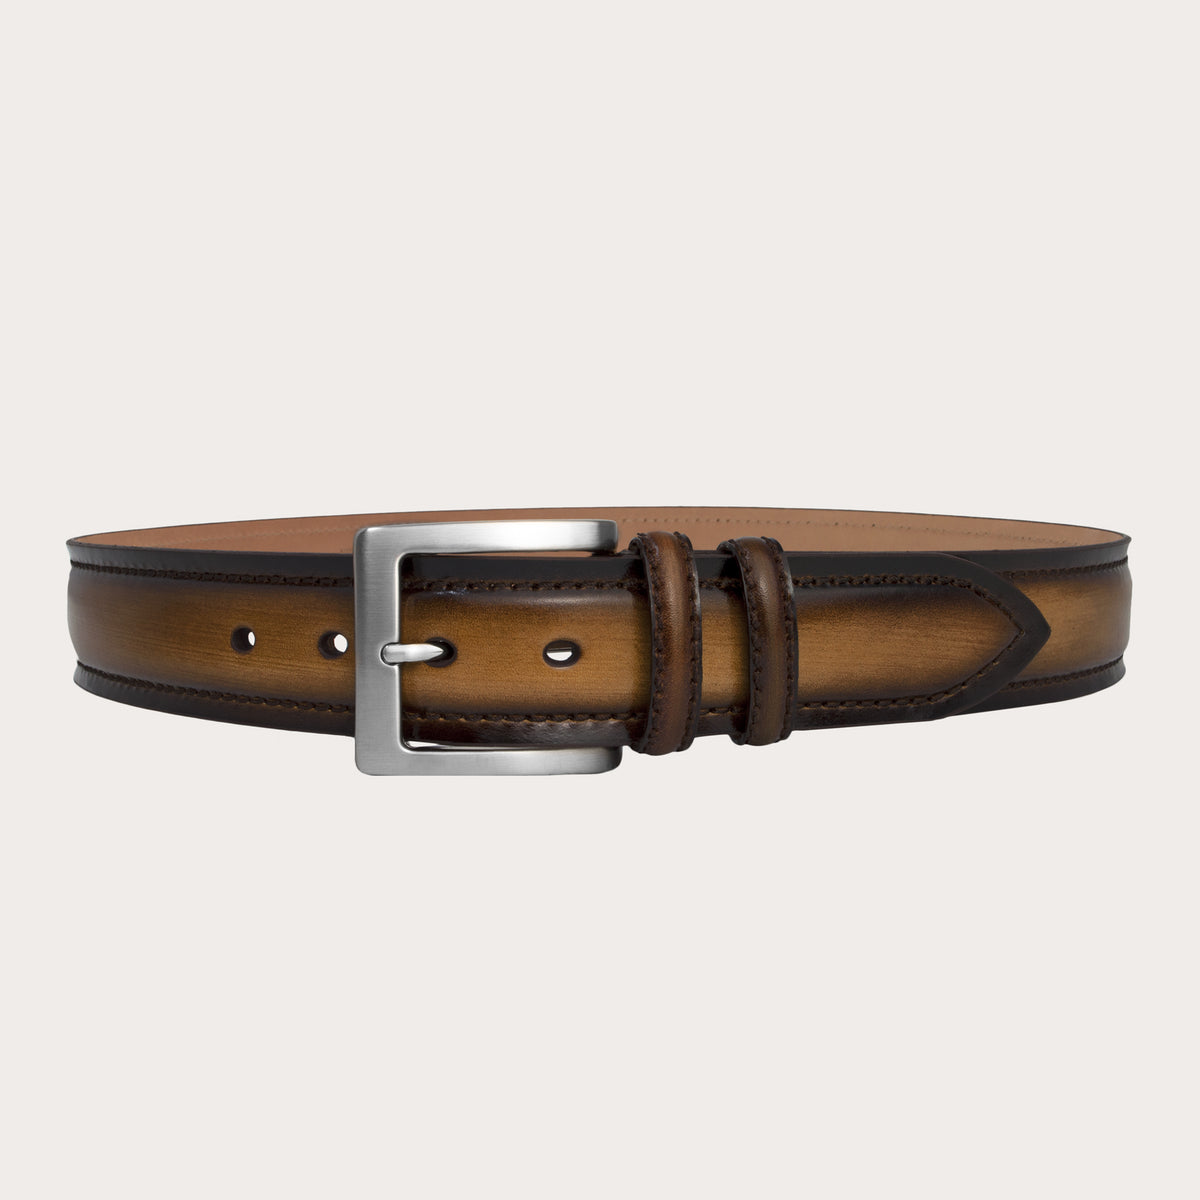 Genuine hand-colored and hand-shaded leather belt